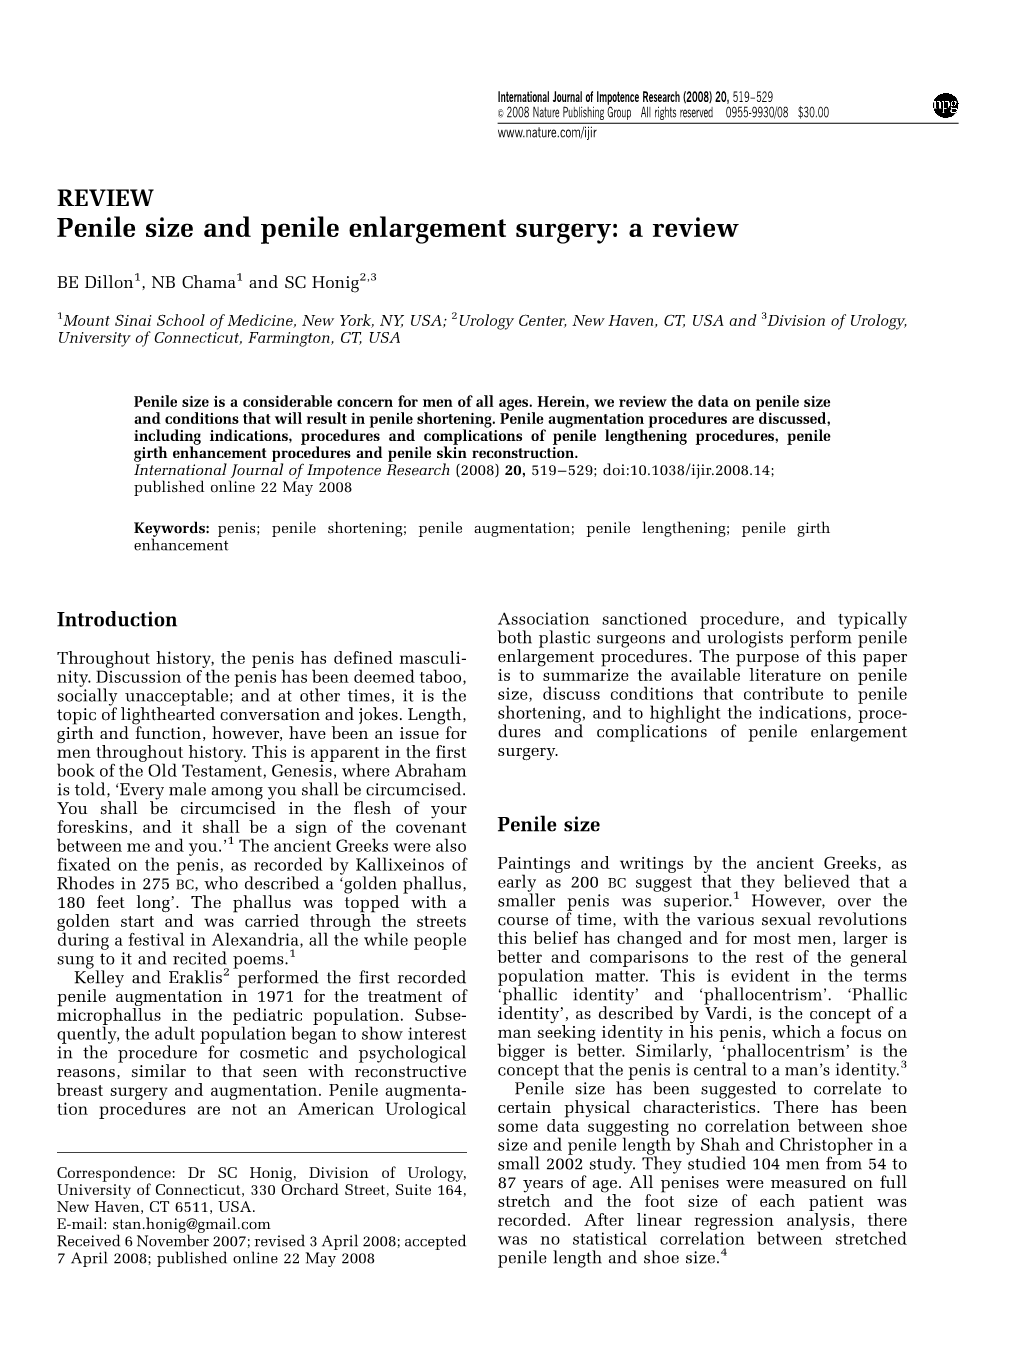 Penile Size and Penile Enlargement Surgery: a Review